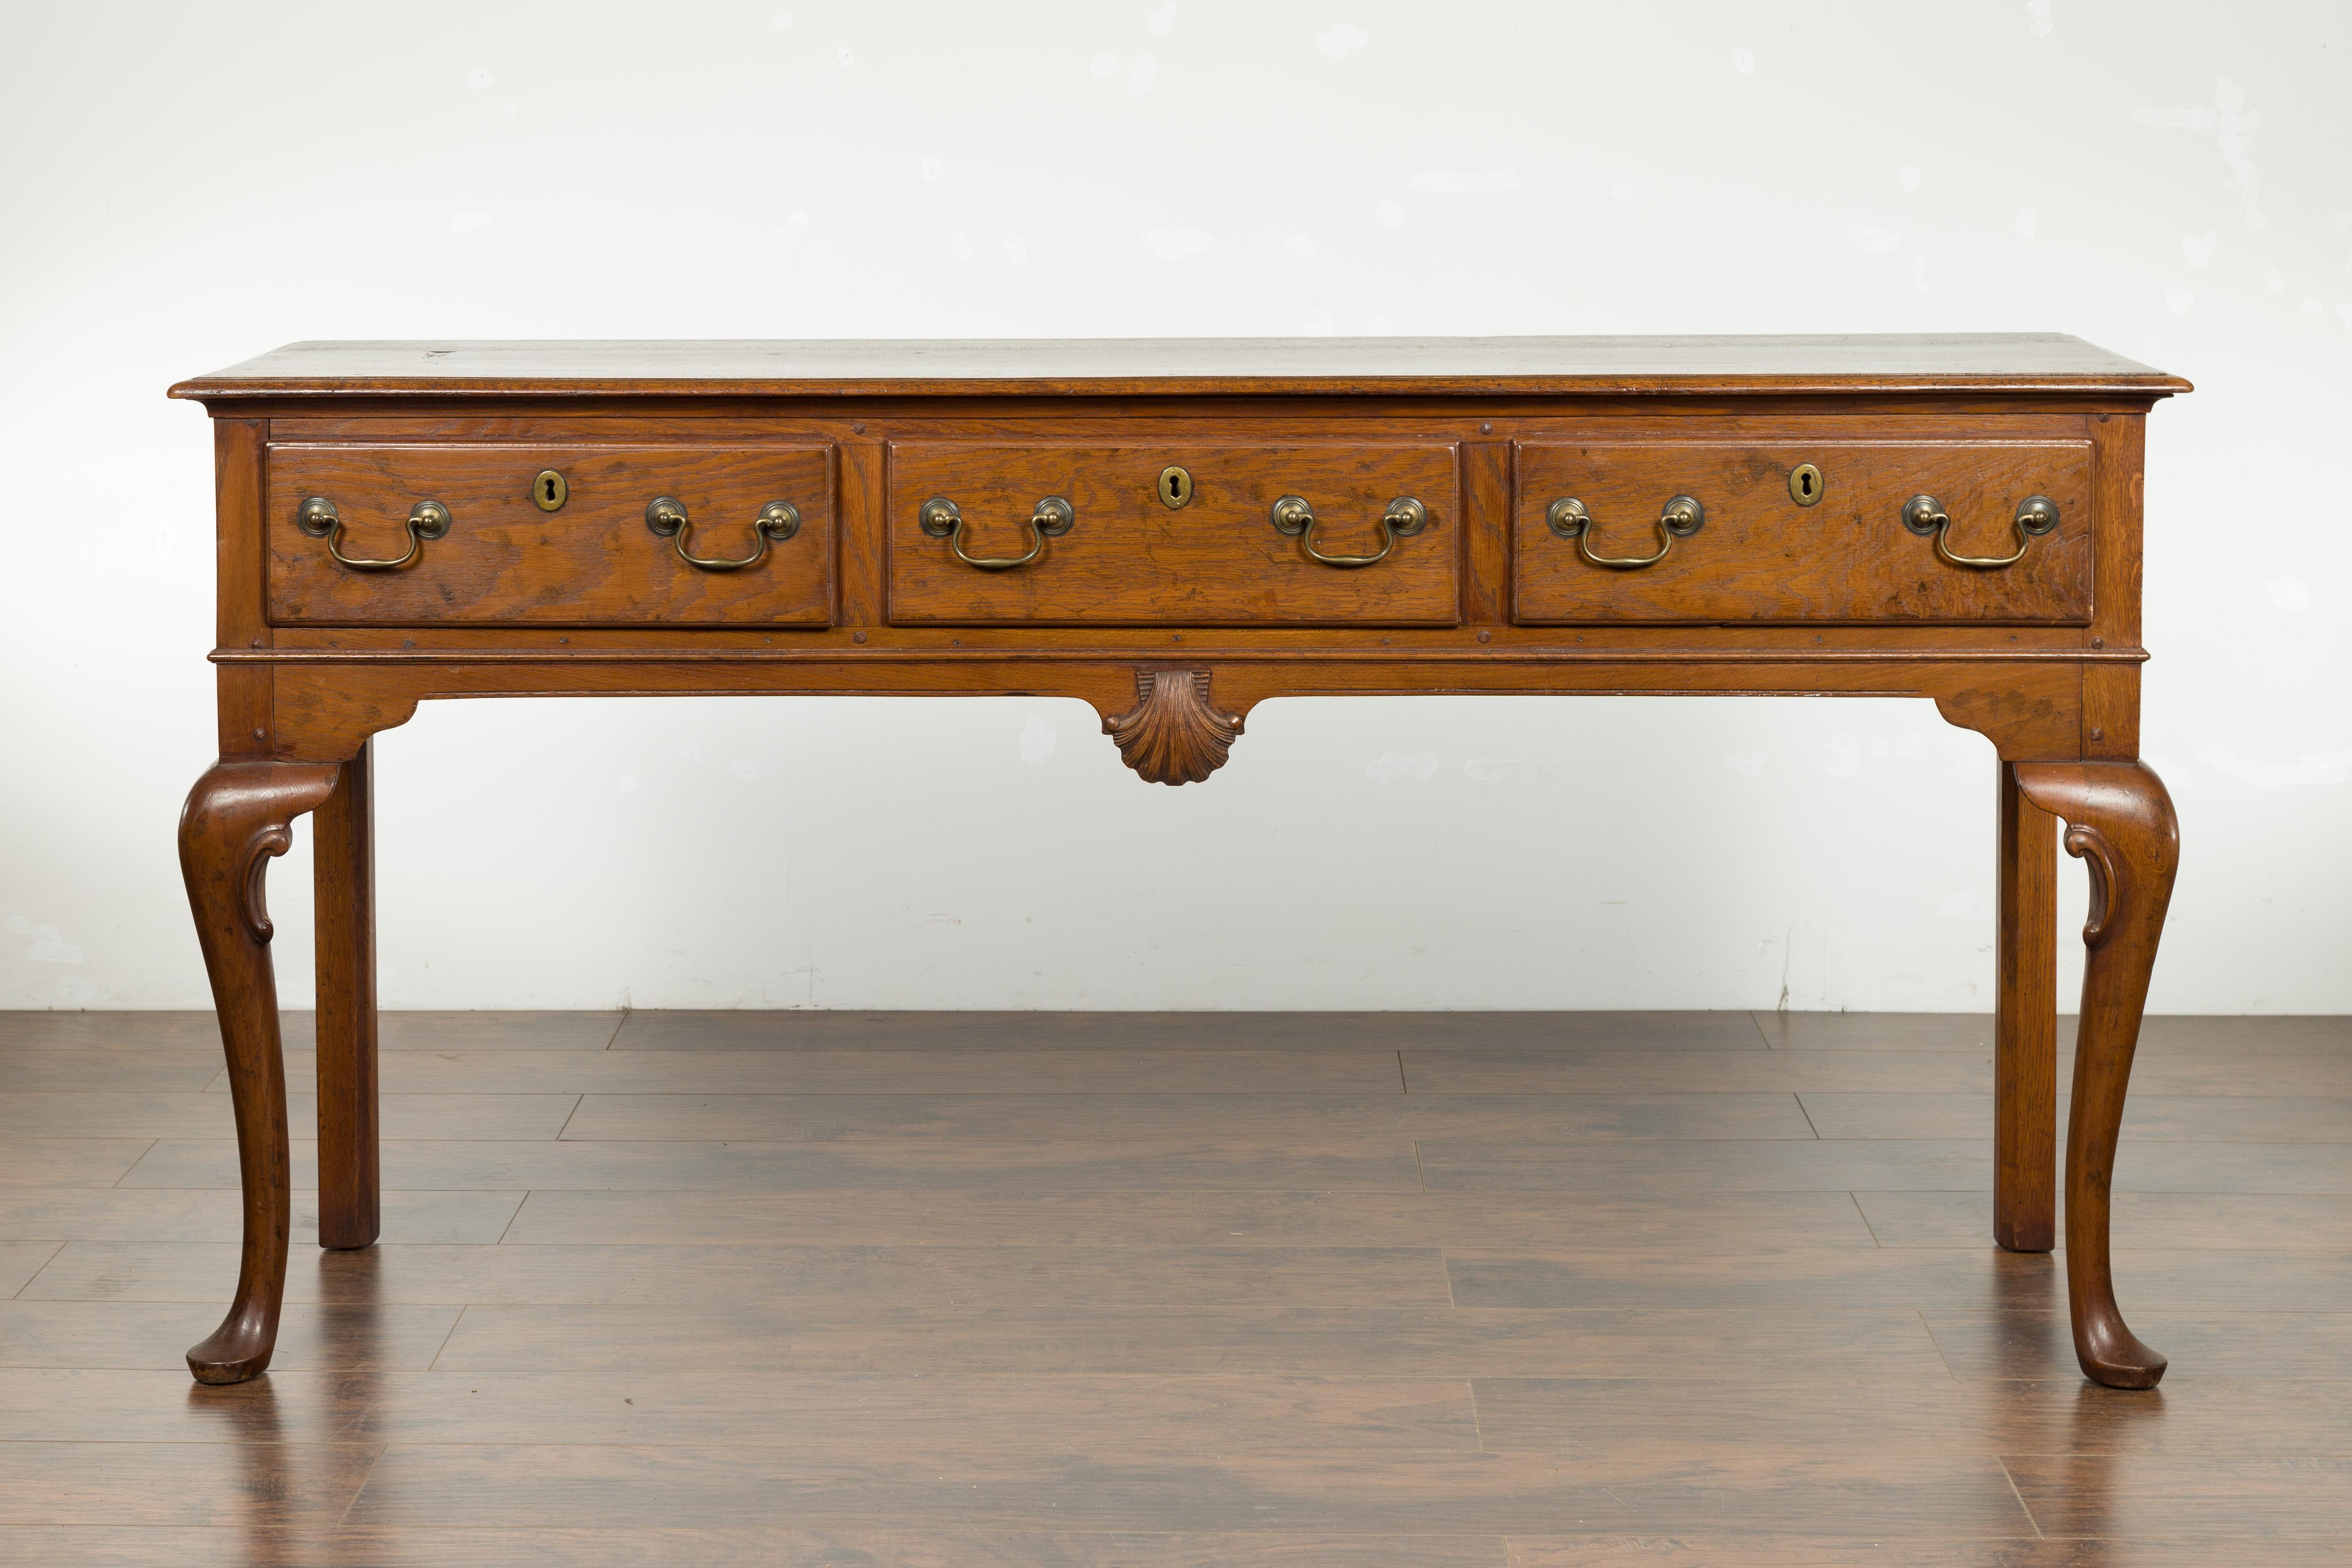 An English oak dresser base from the early 20th century, with three drawers, cabriole legs and carved shell motif. Created in England at the turn of the century, this oak dresser base / server features a rectangular planked top sitting above three